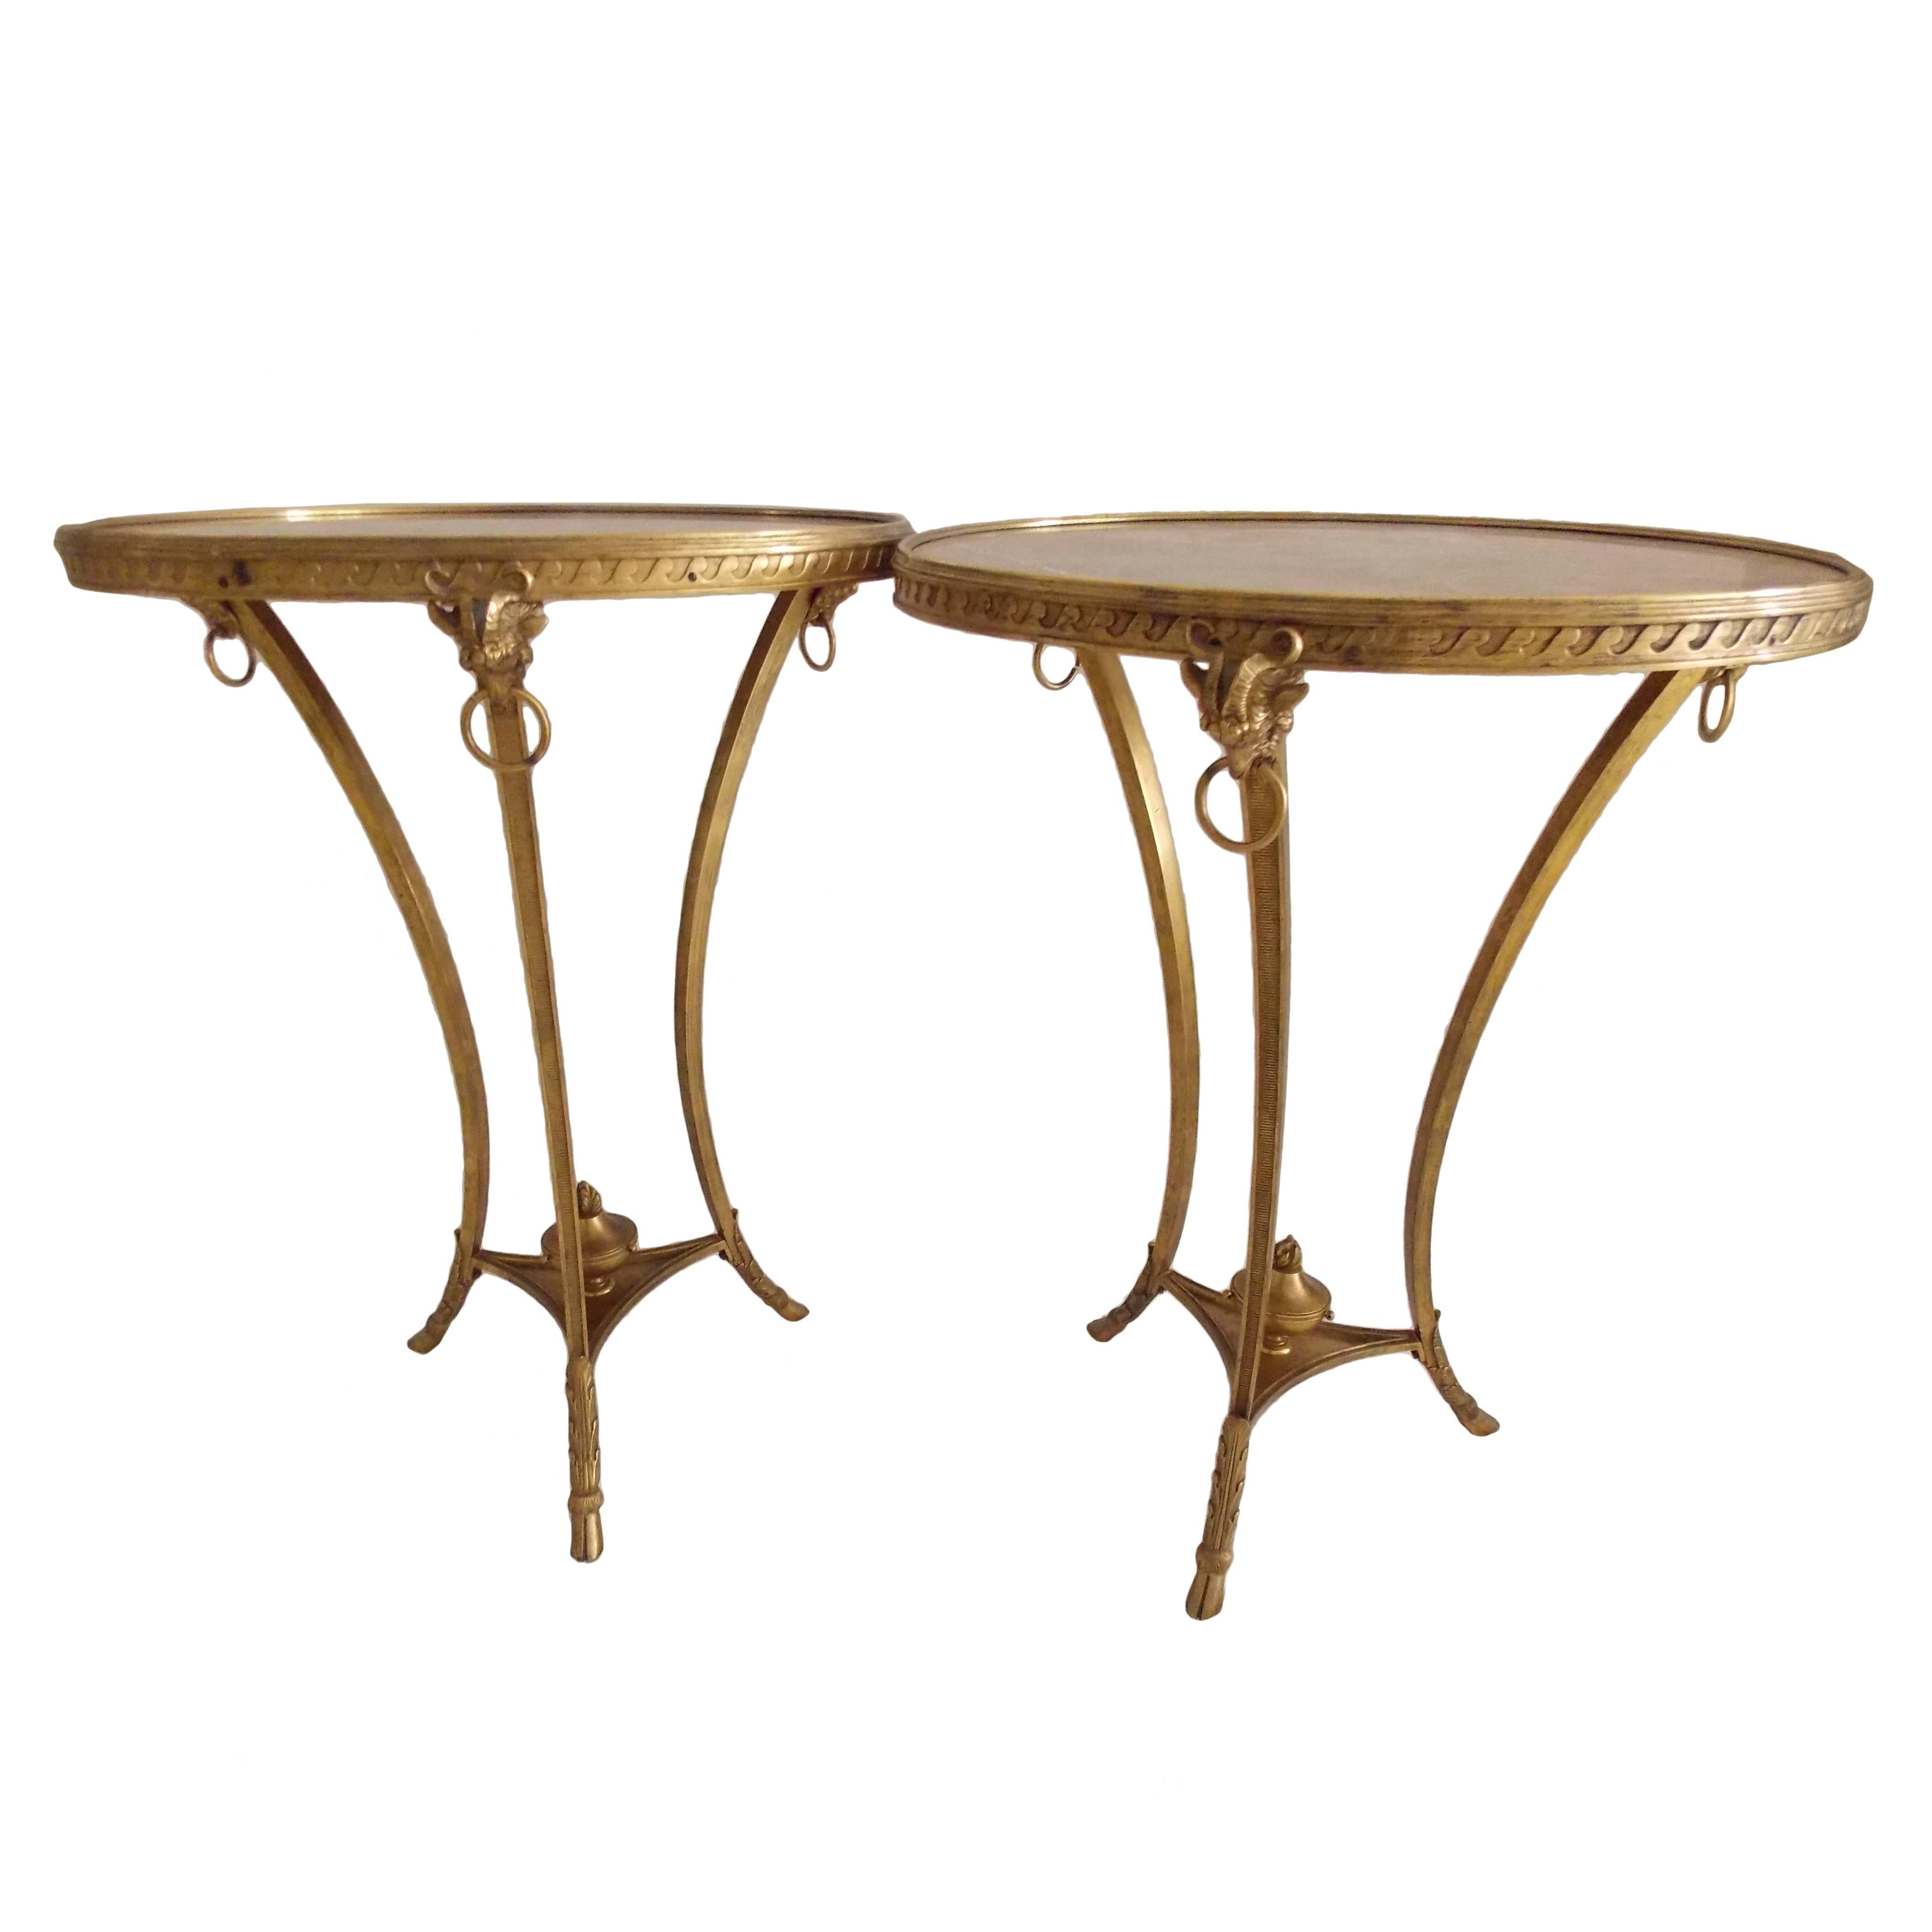 Pair of 19th Century French Louis XVI Style Gilt Bronze Gueridon Tables